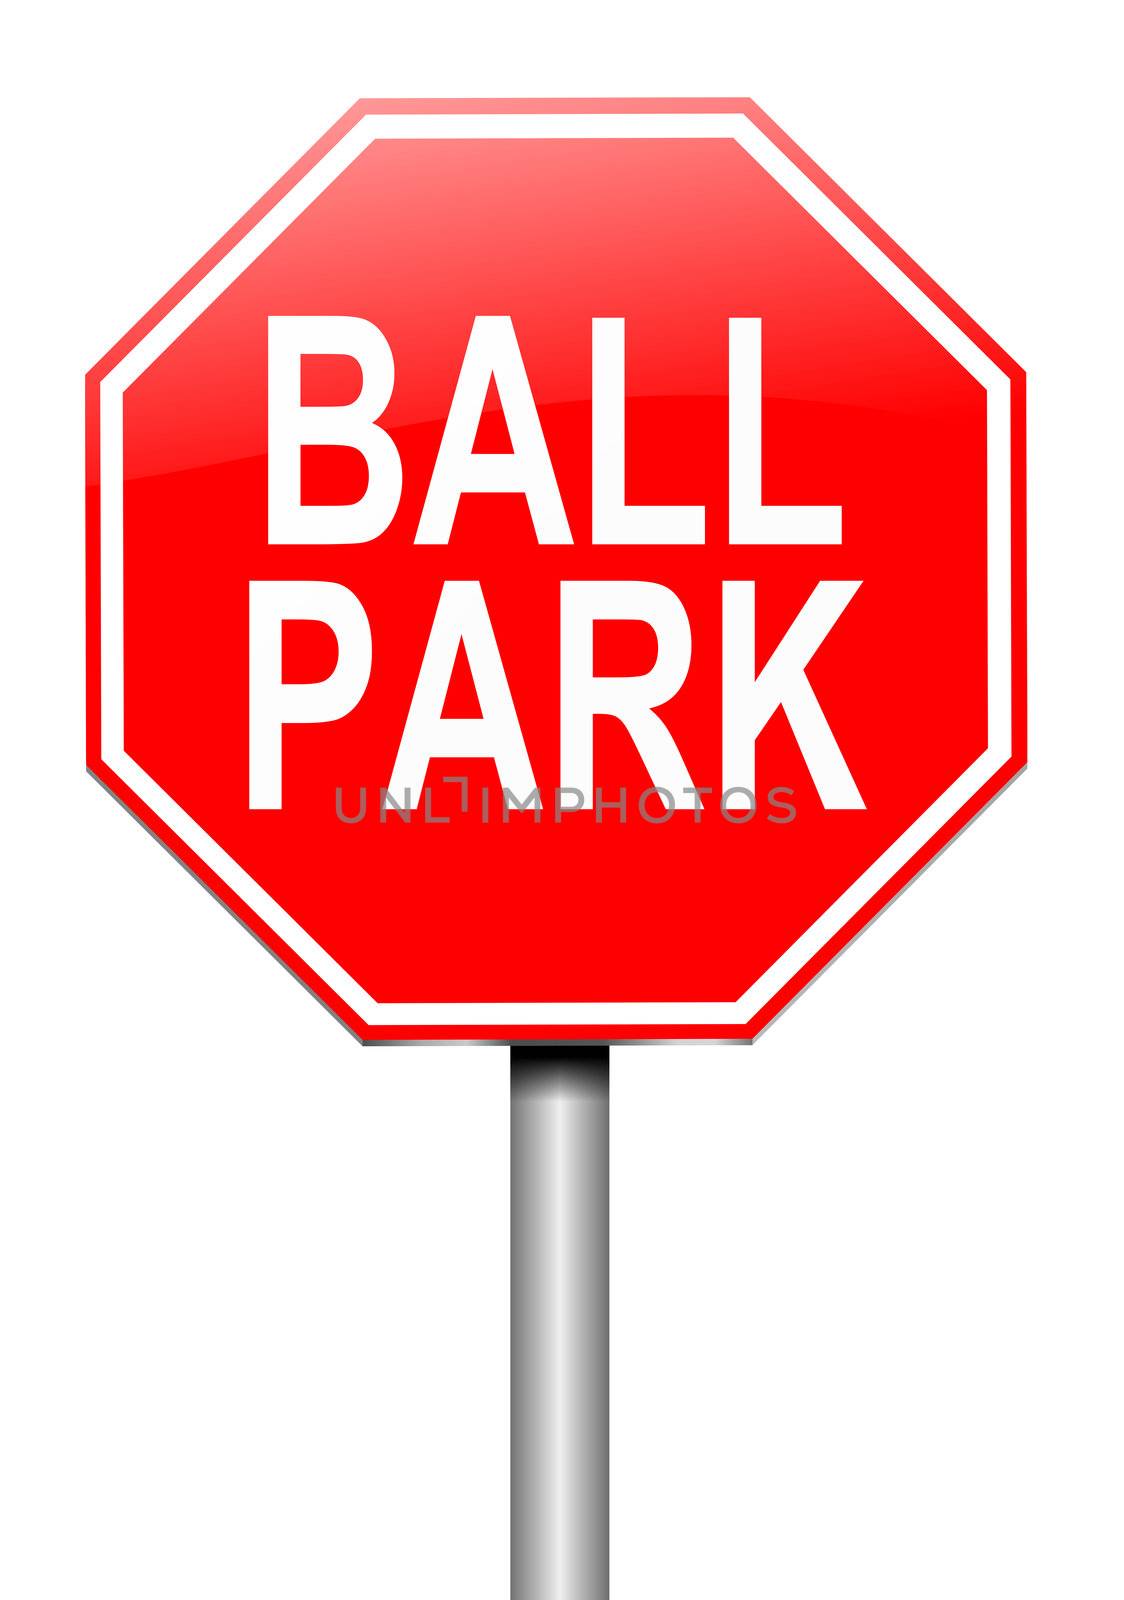 Illustration depicting a roadsign with a ball park concept. White background.